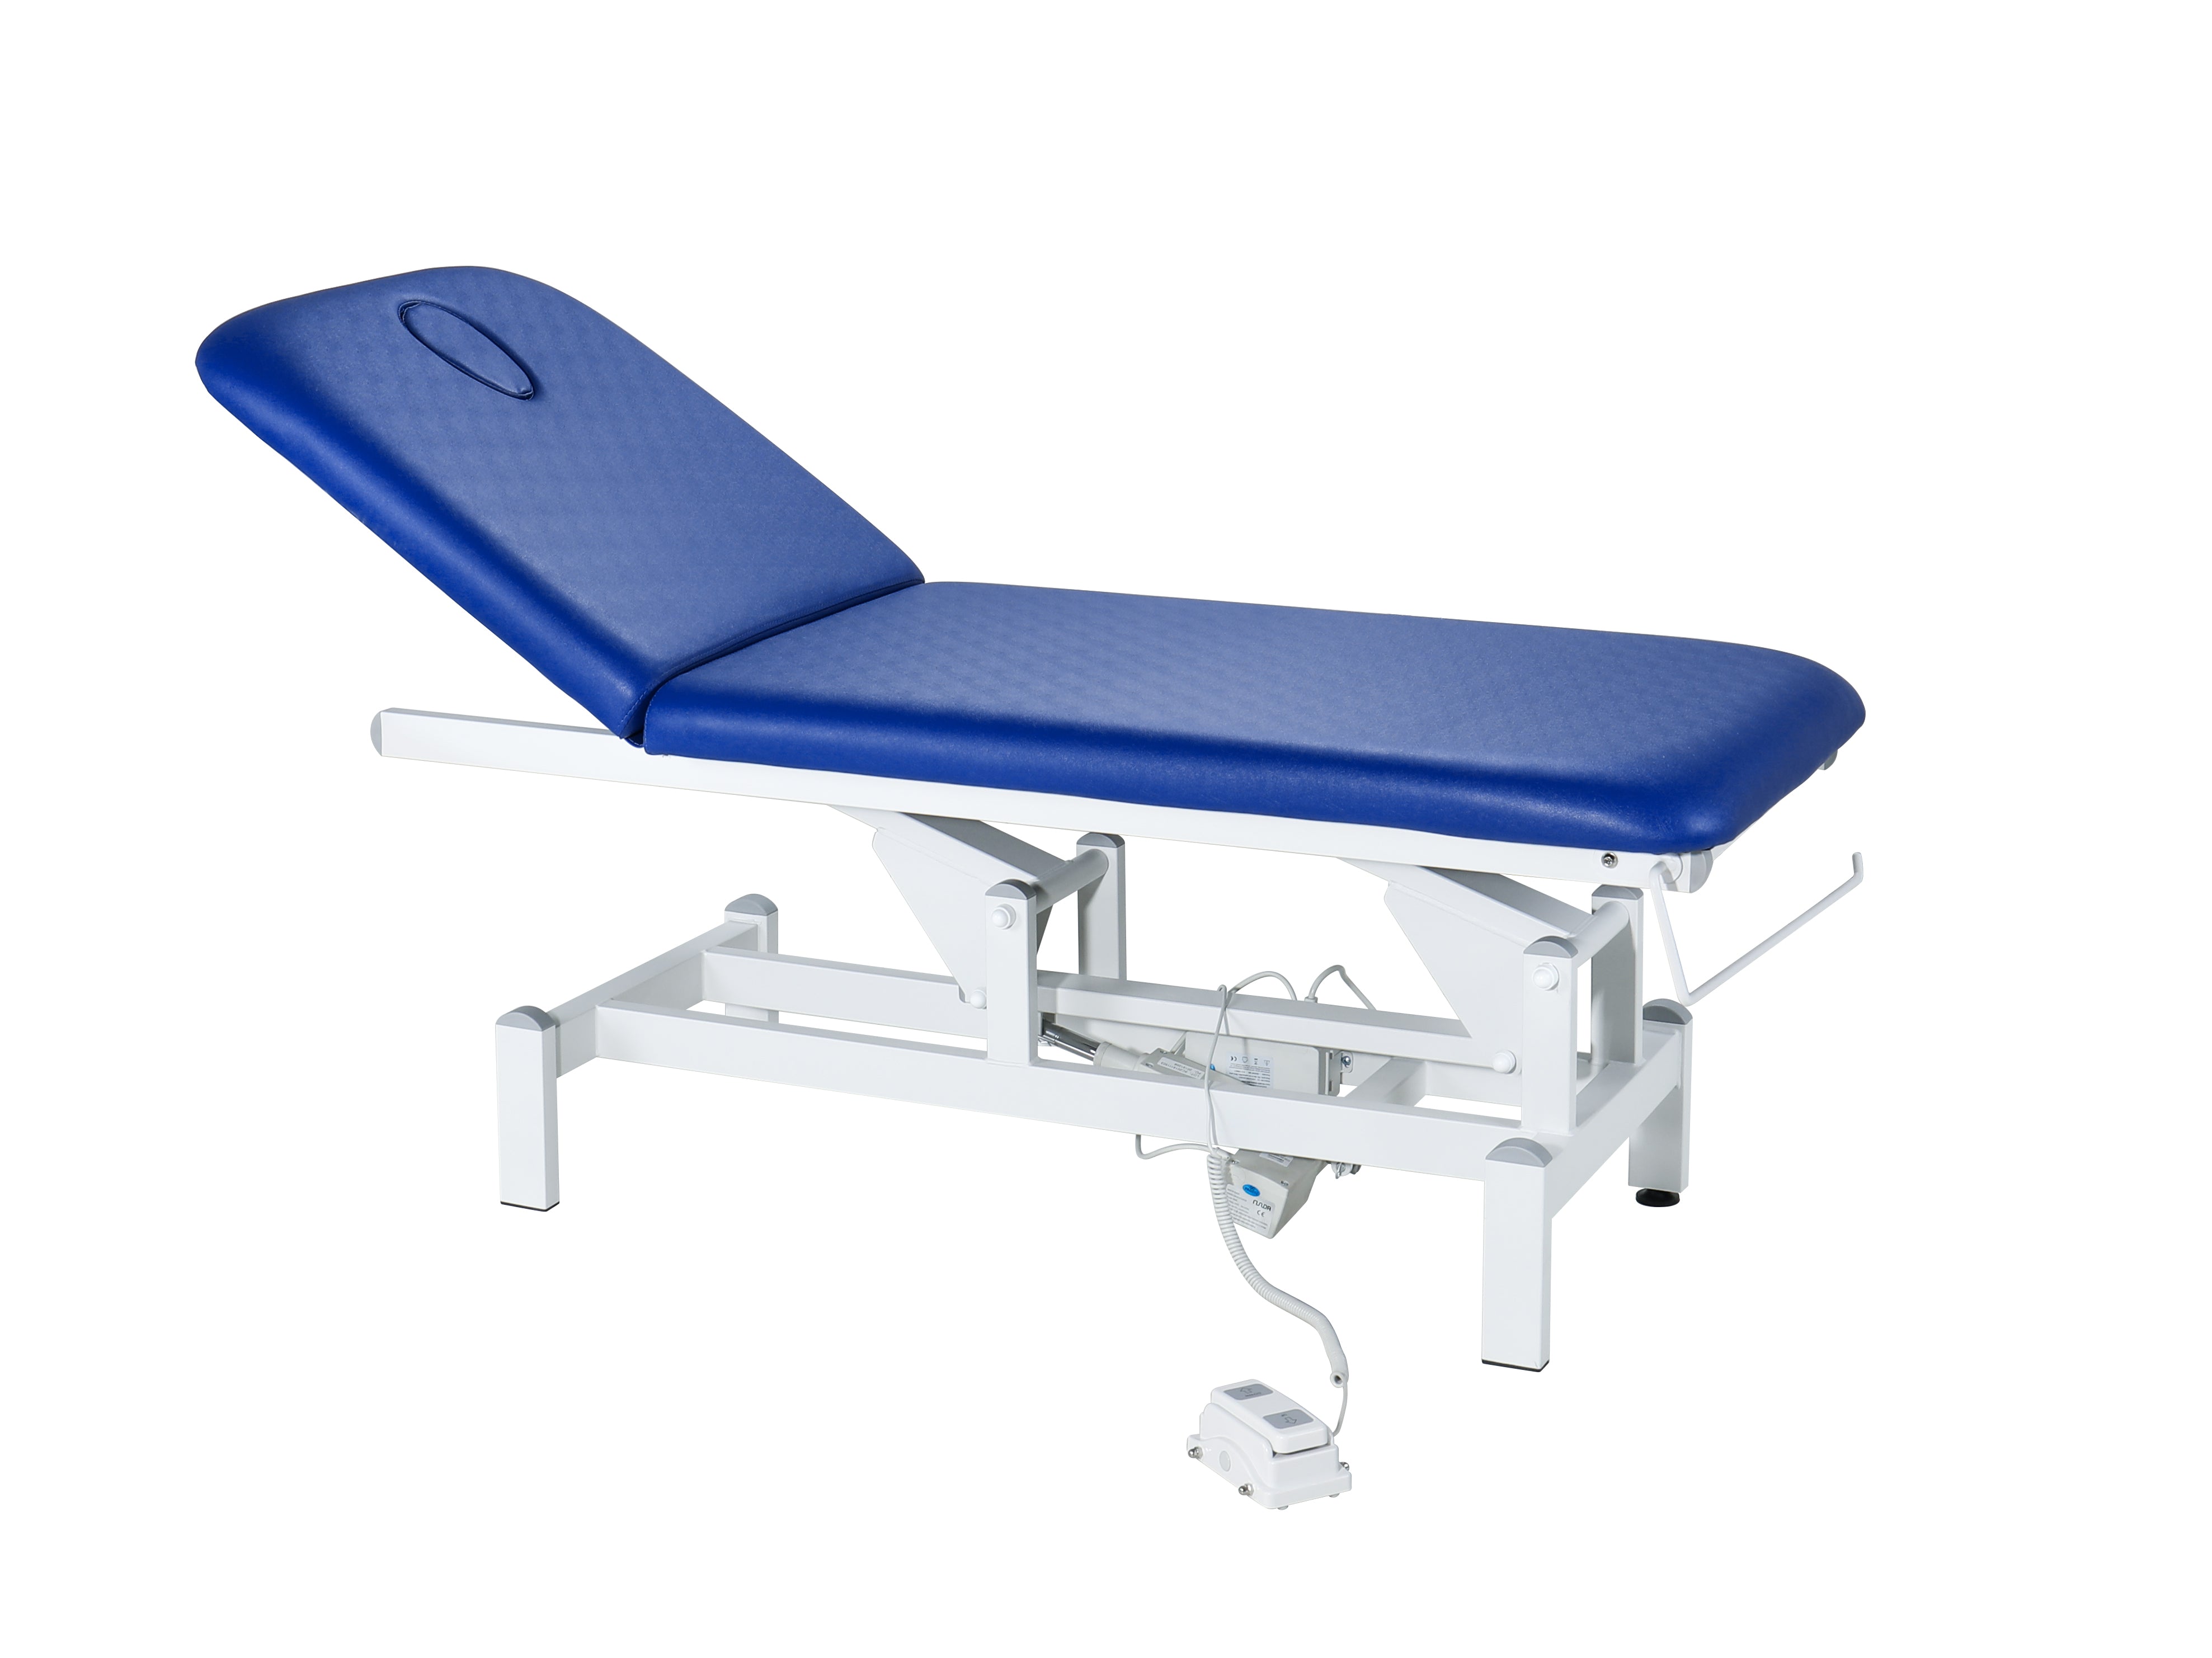 Beautyace Cale Spa Electric Multi-Purpose Doctor's Reclining Work Bed